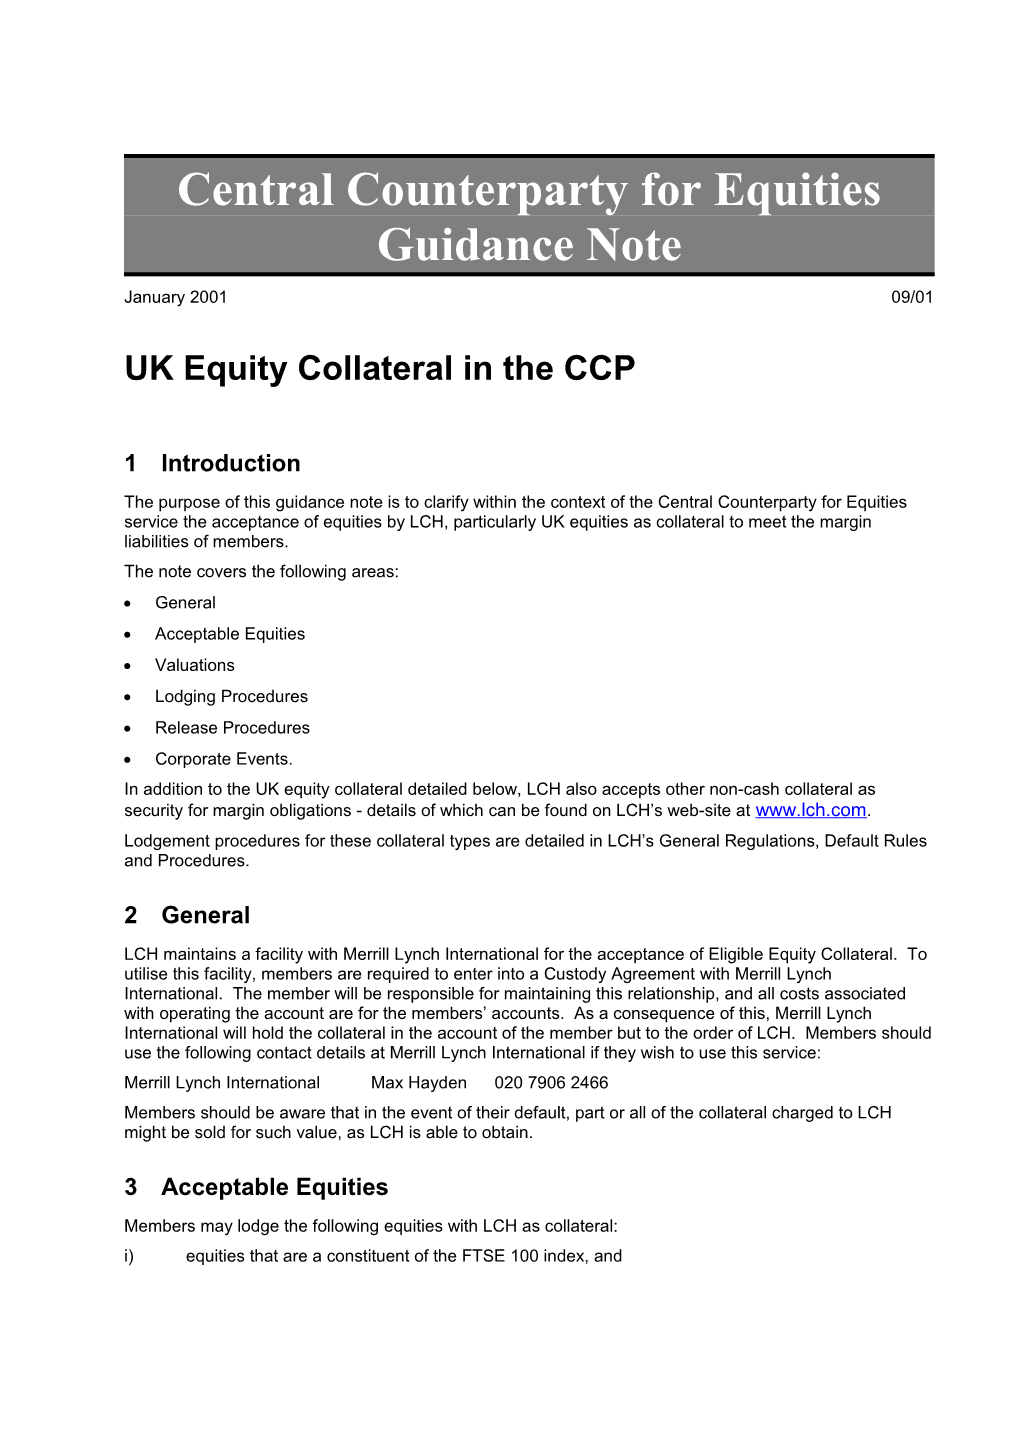 Central Counterparty for Equities Guidance Note Jan 2001, 09/01